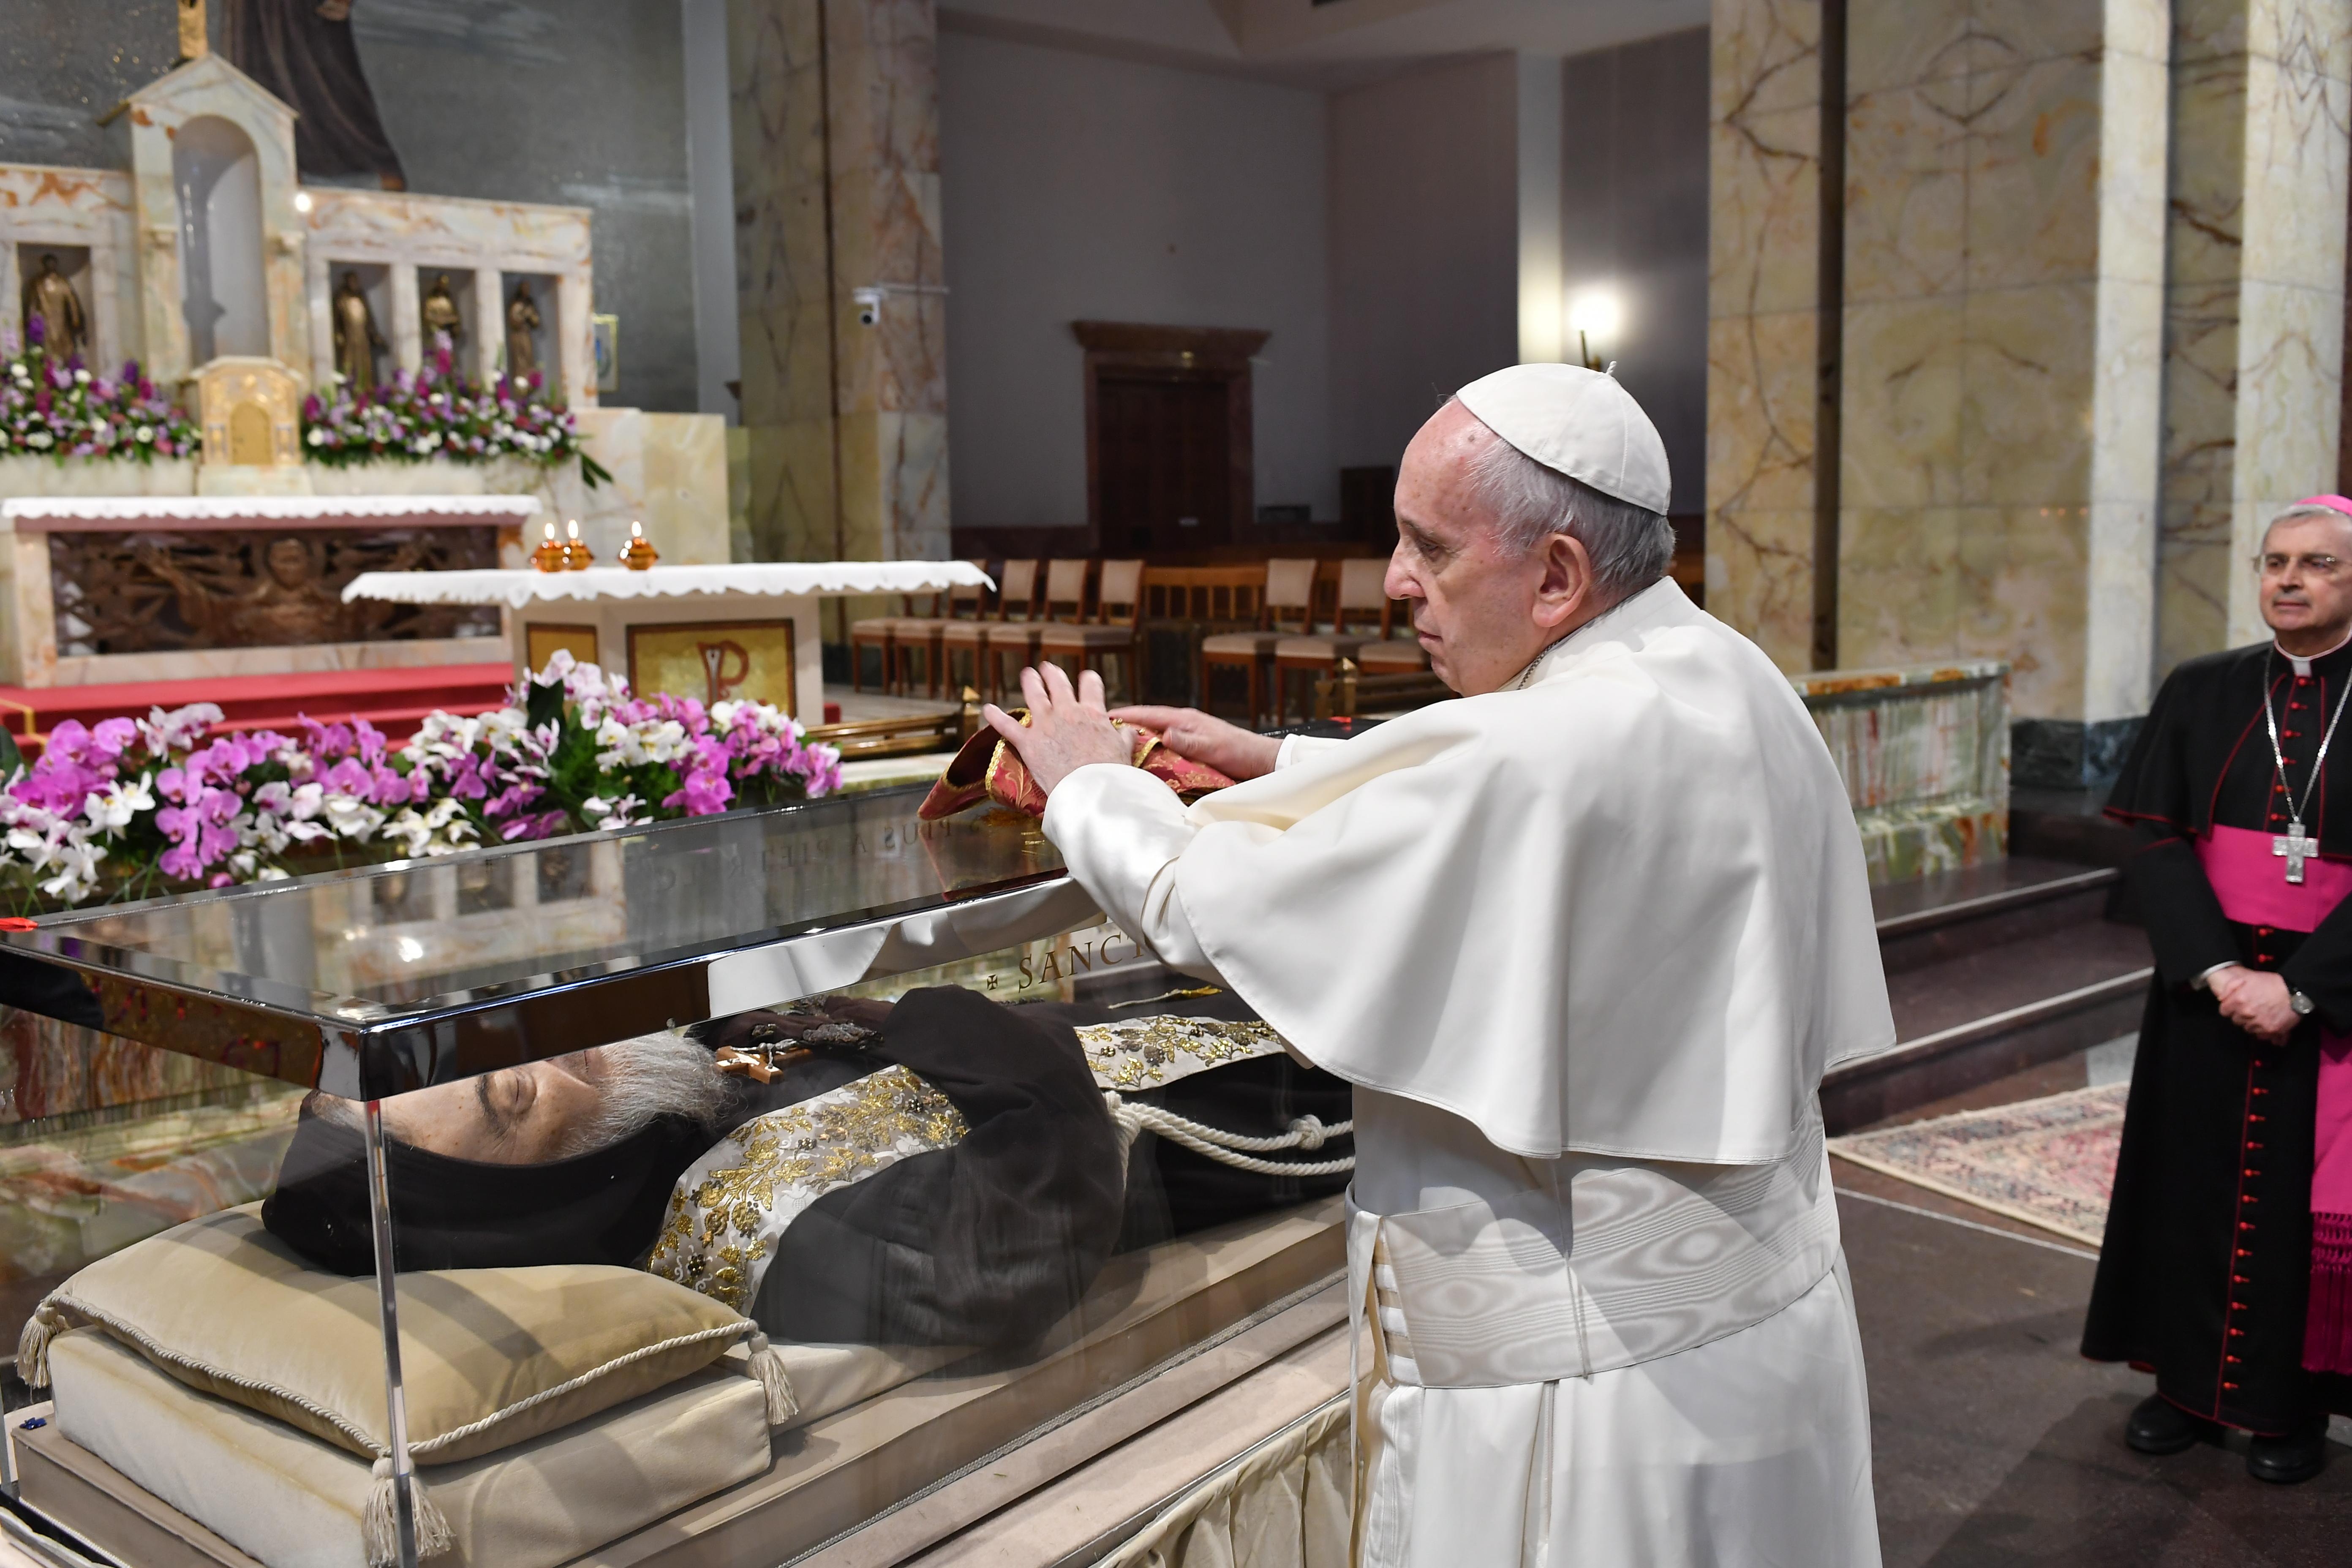 Emulate piety of Padre Pio, says Pope